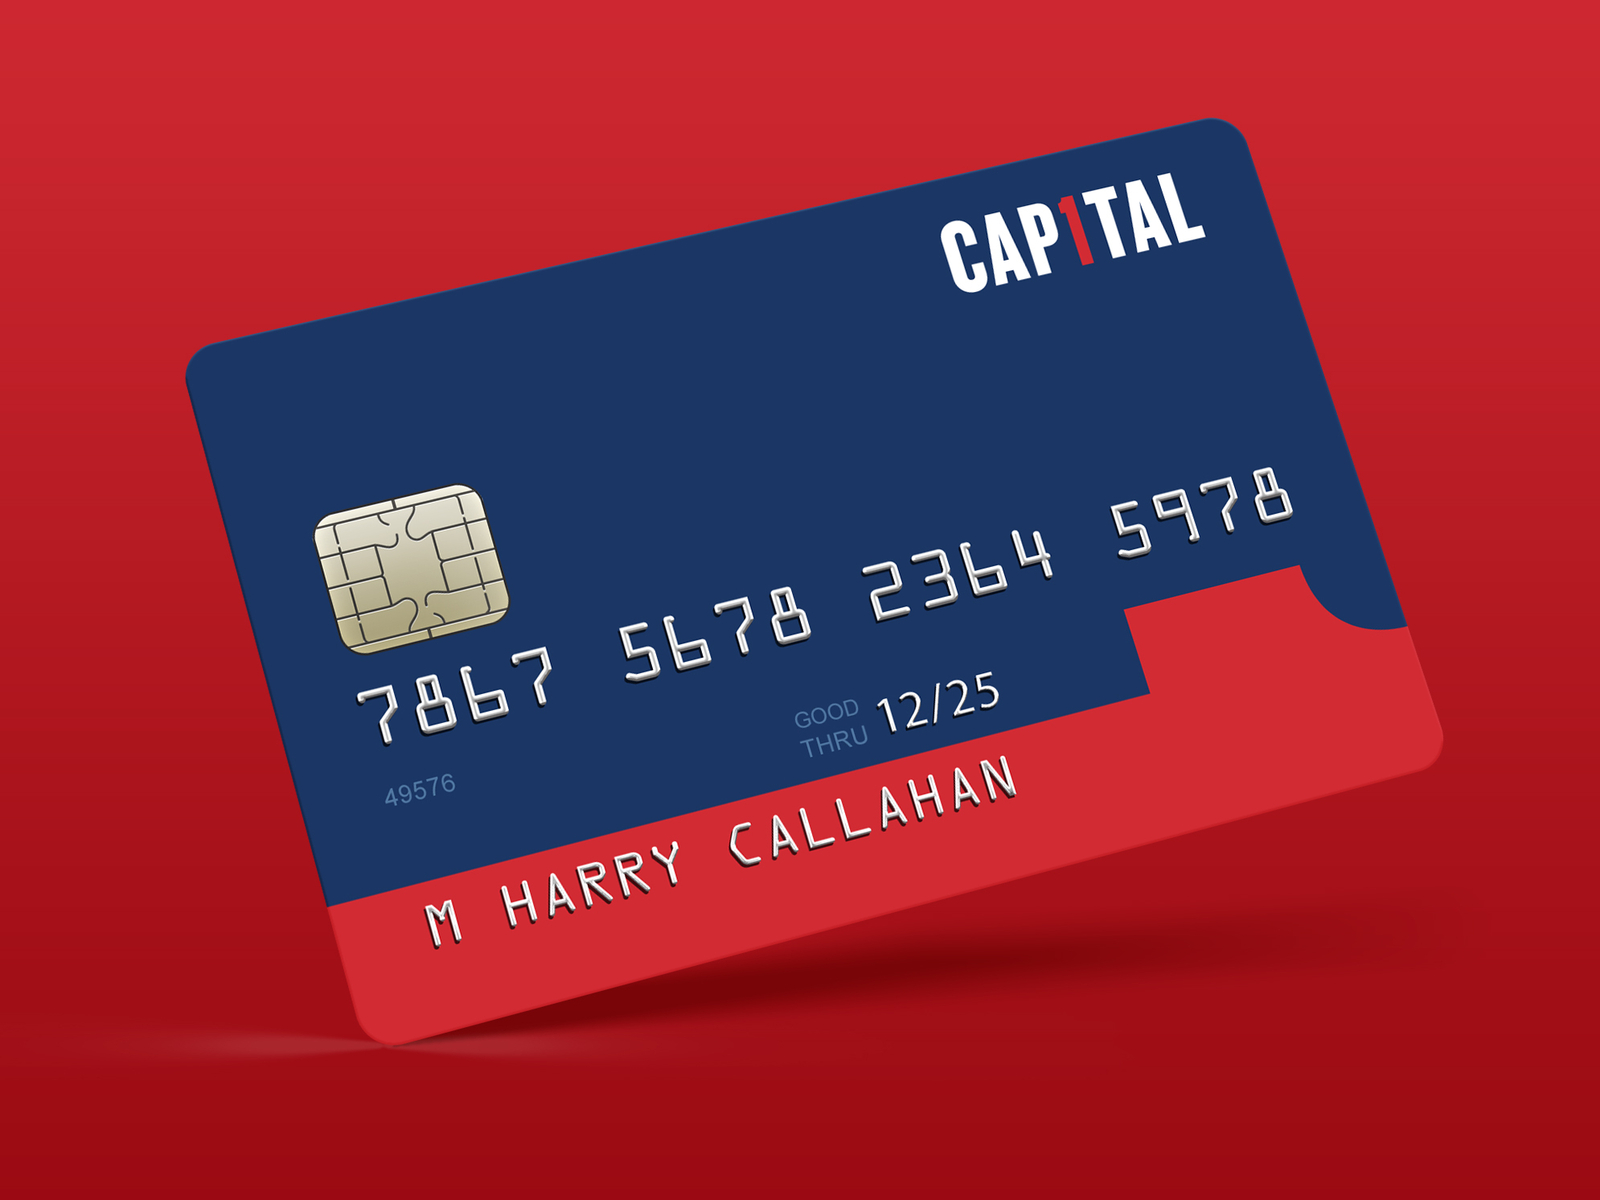 Capital One Card Design by Sam Harachis on Dribbble